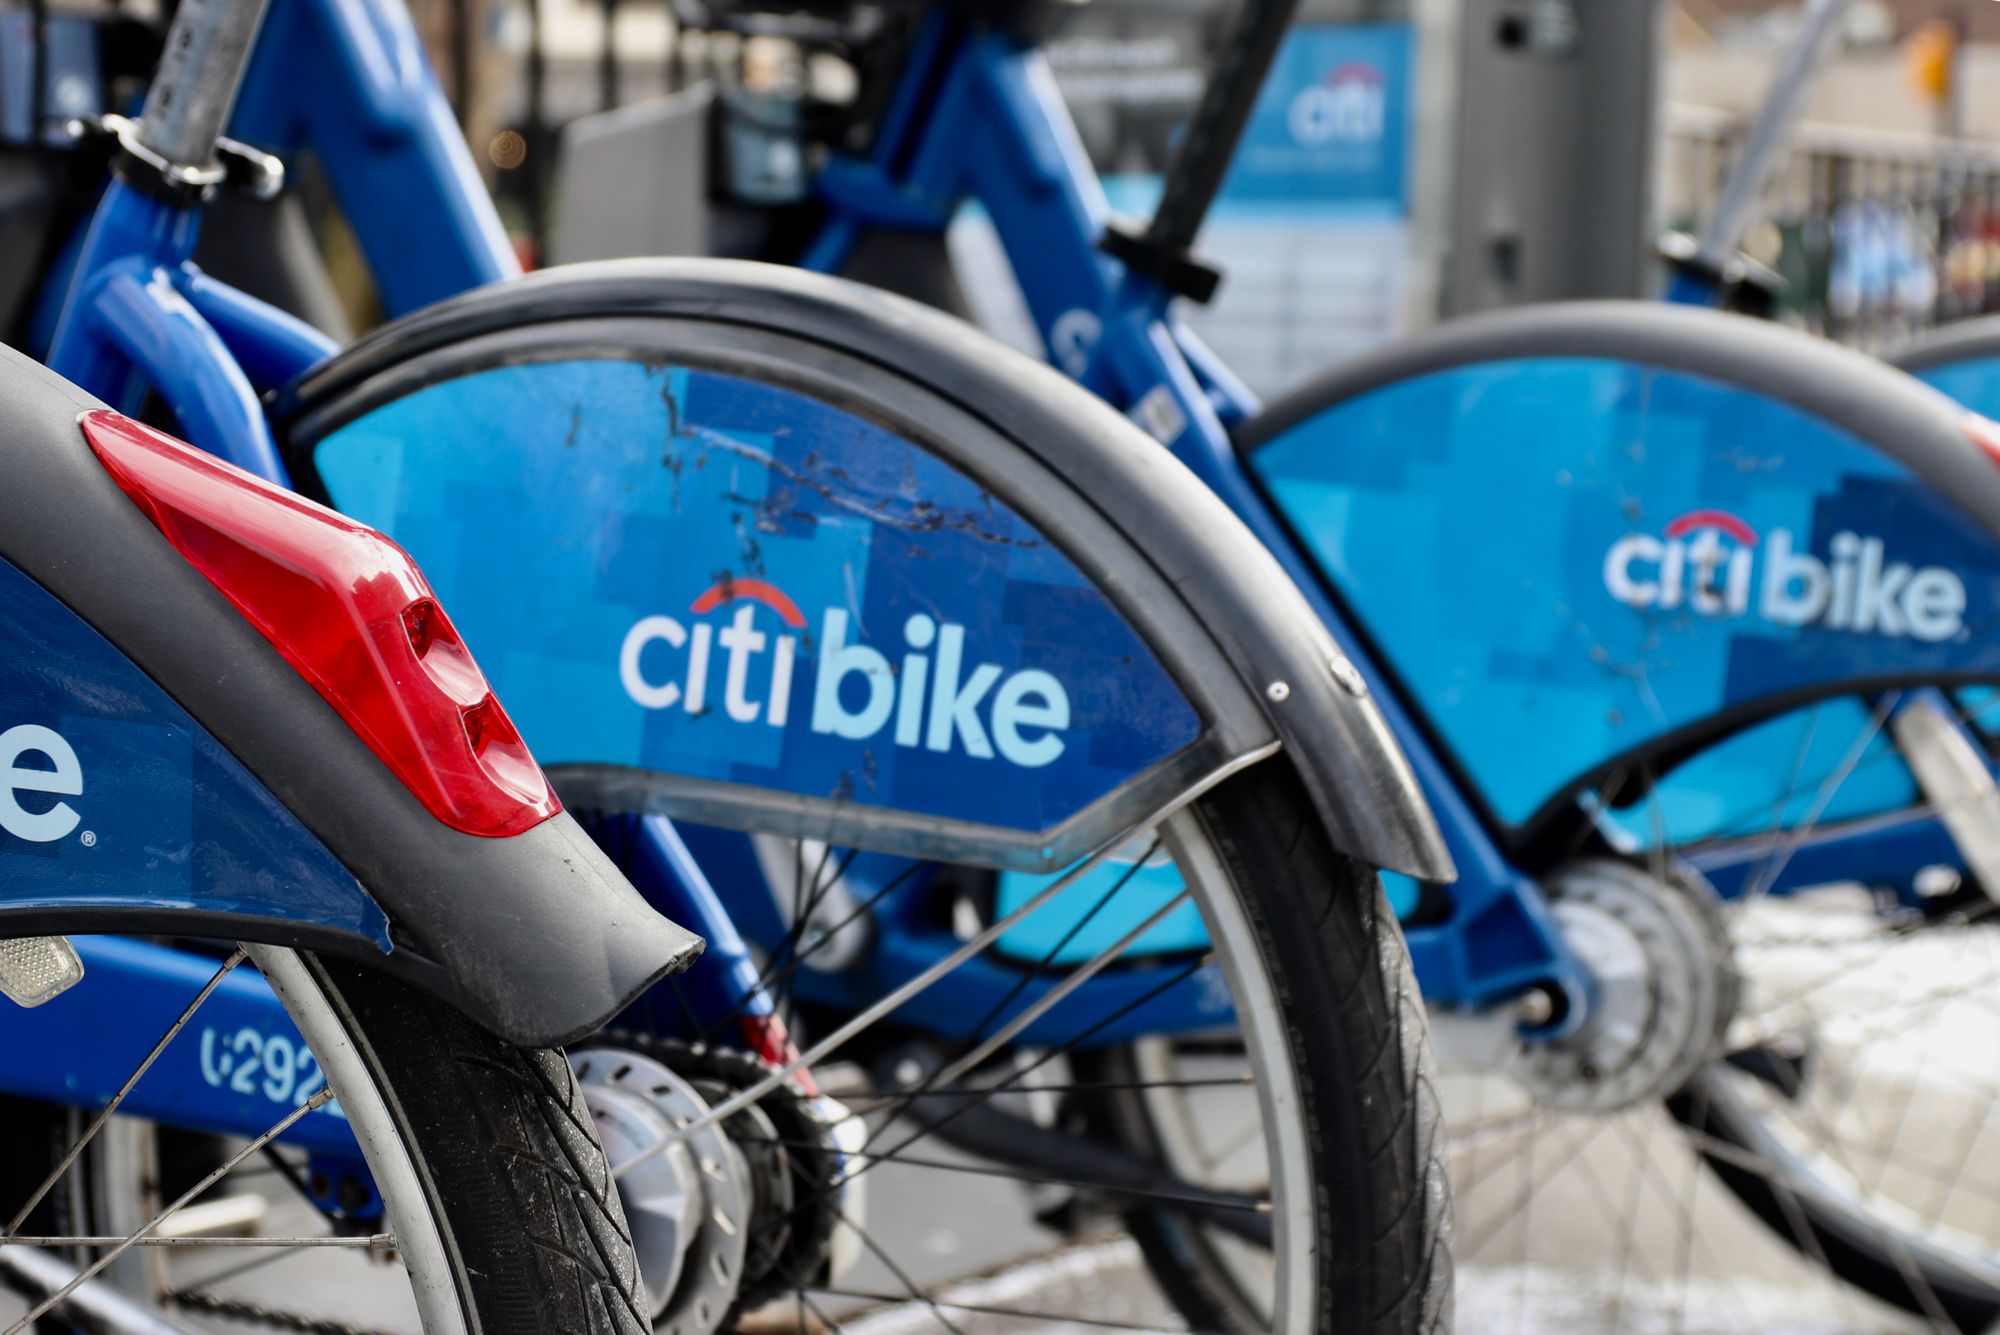 One Day Left To Give Feedback On Citi Bike Phase 3 Expansion